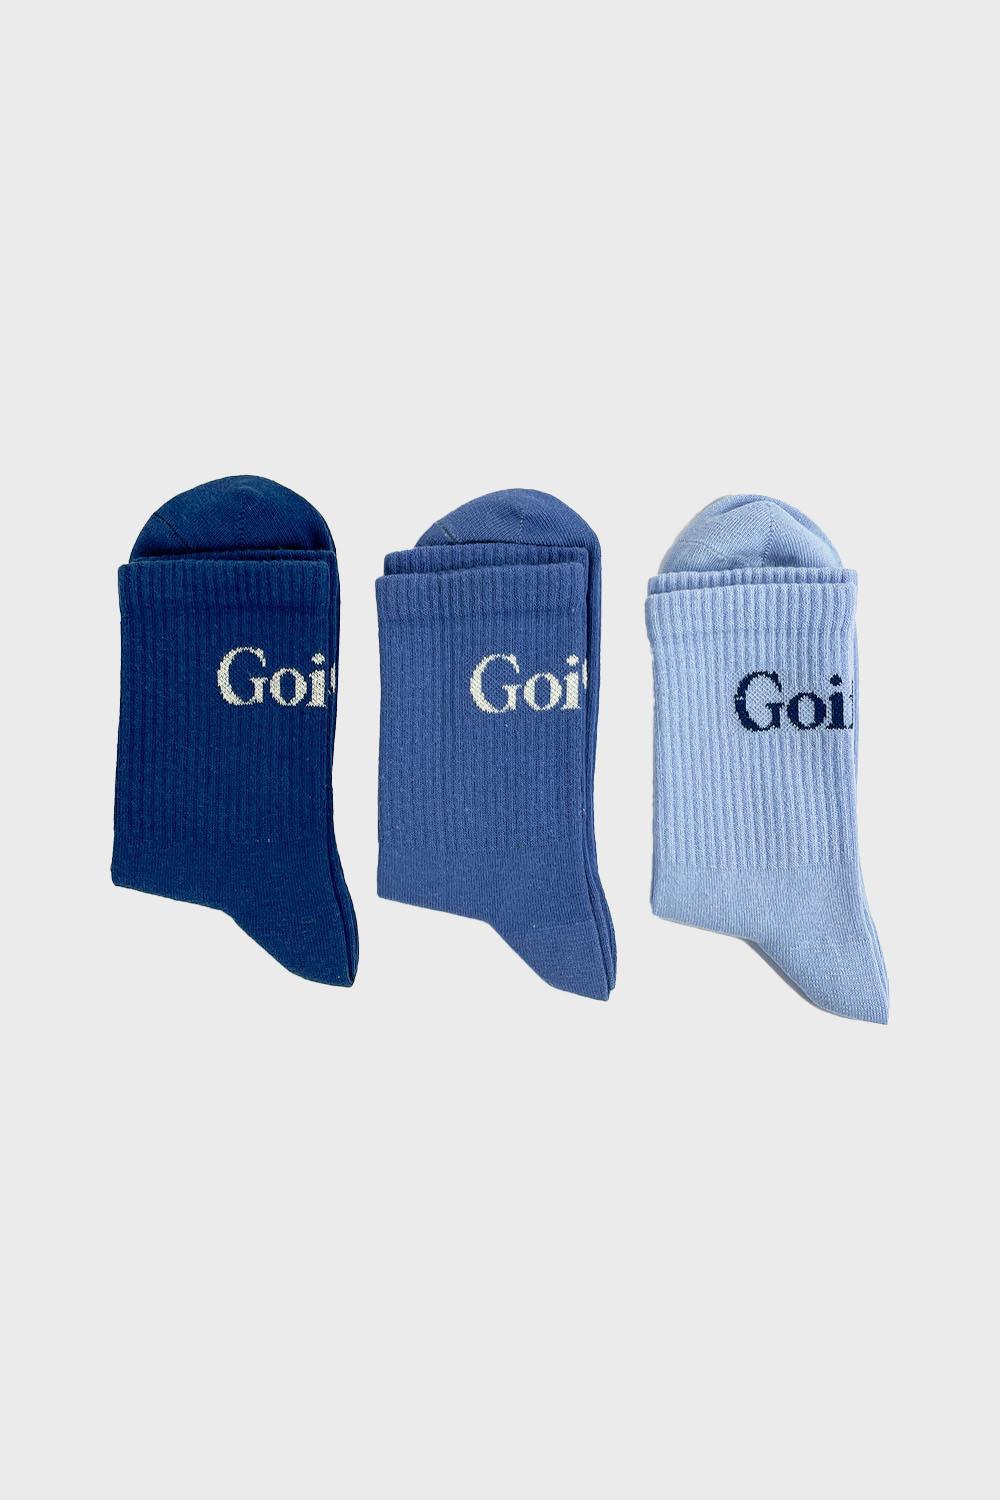 Going Places Socks - Blue